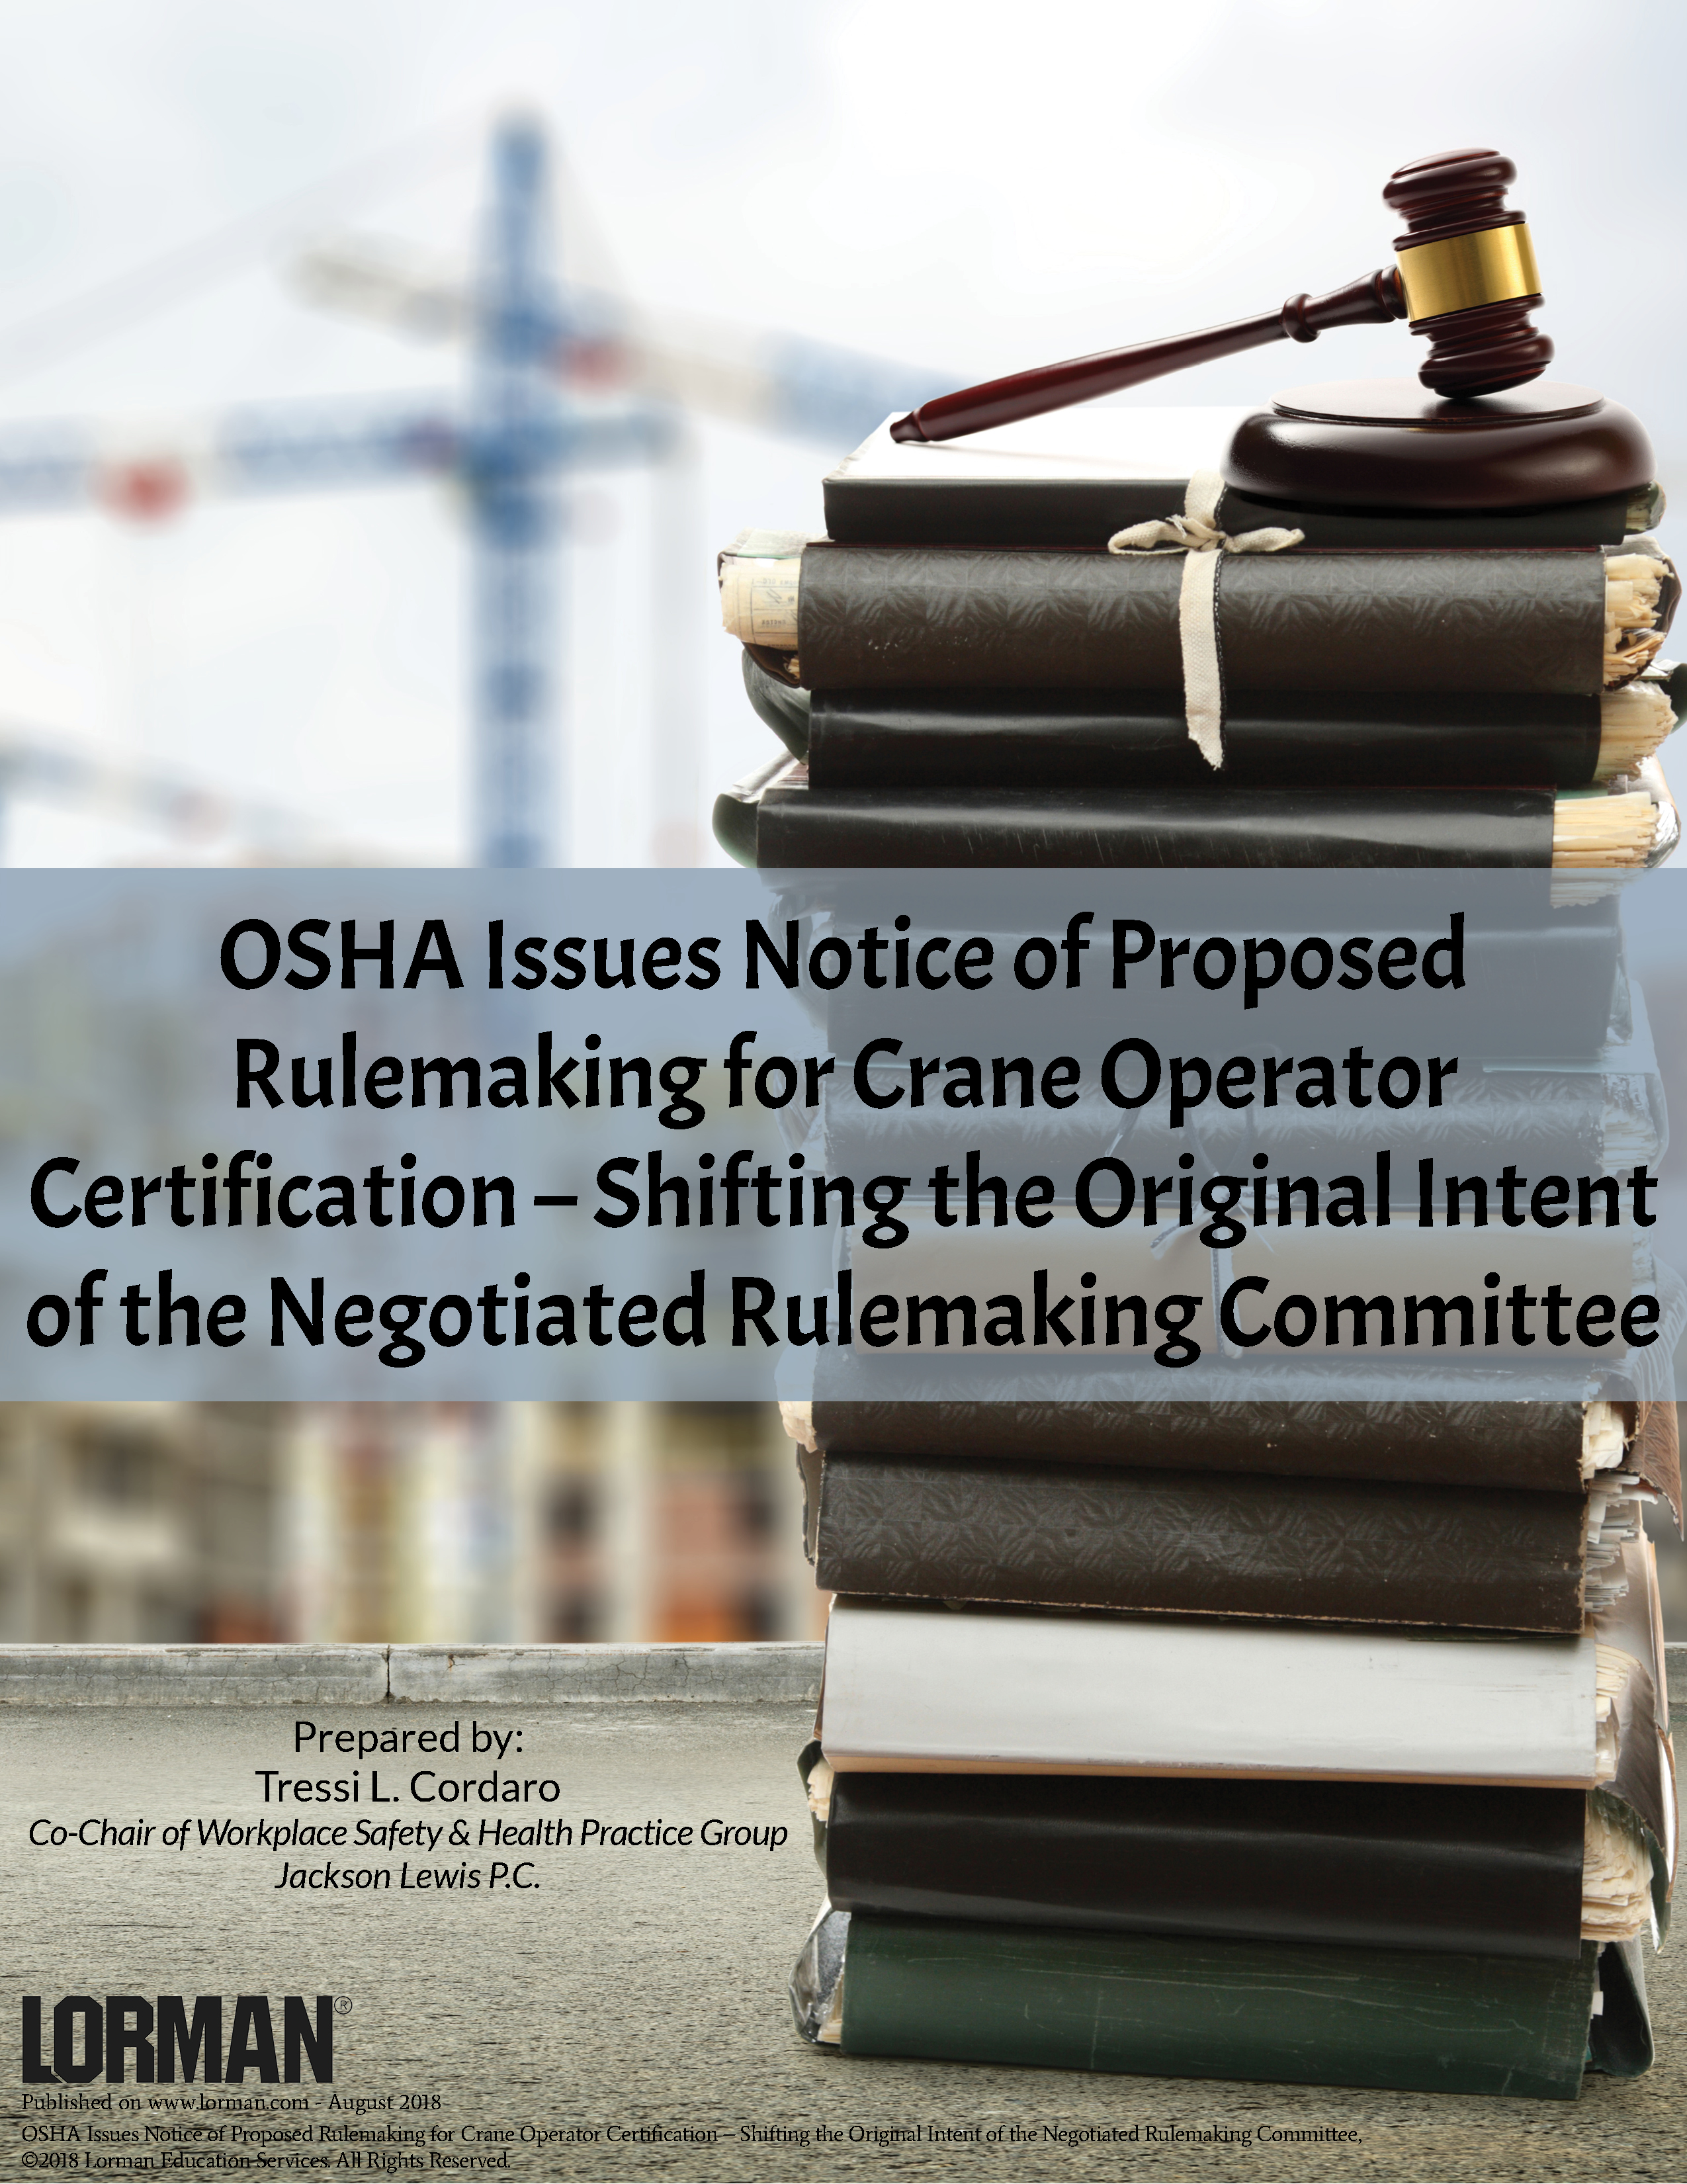 OSHA Issues Notice of Proposed Rulemaking for Crane Operator Certification